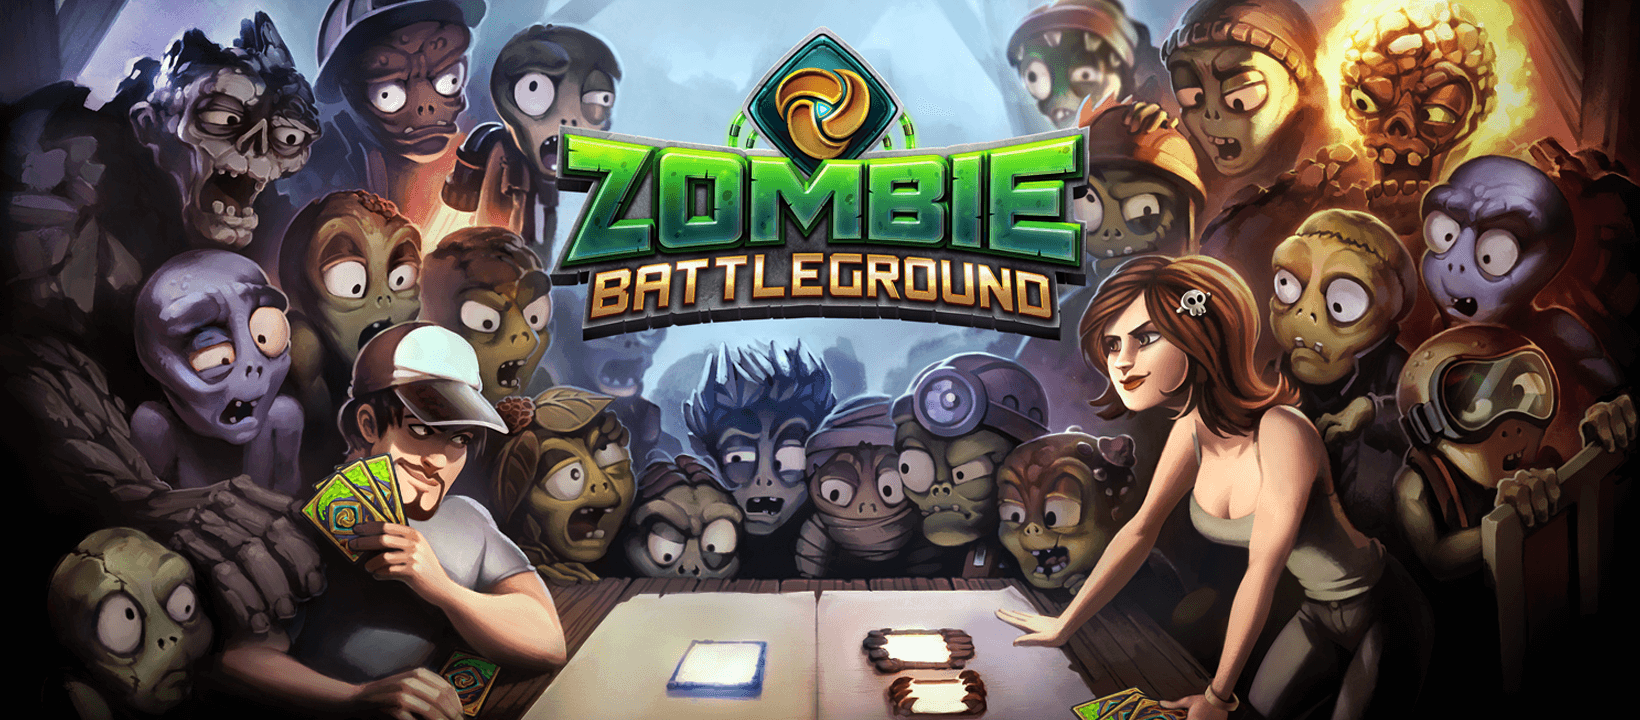 Zombie Army 4: Dead Ahead Walkthrough And Collectibles